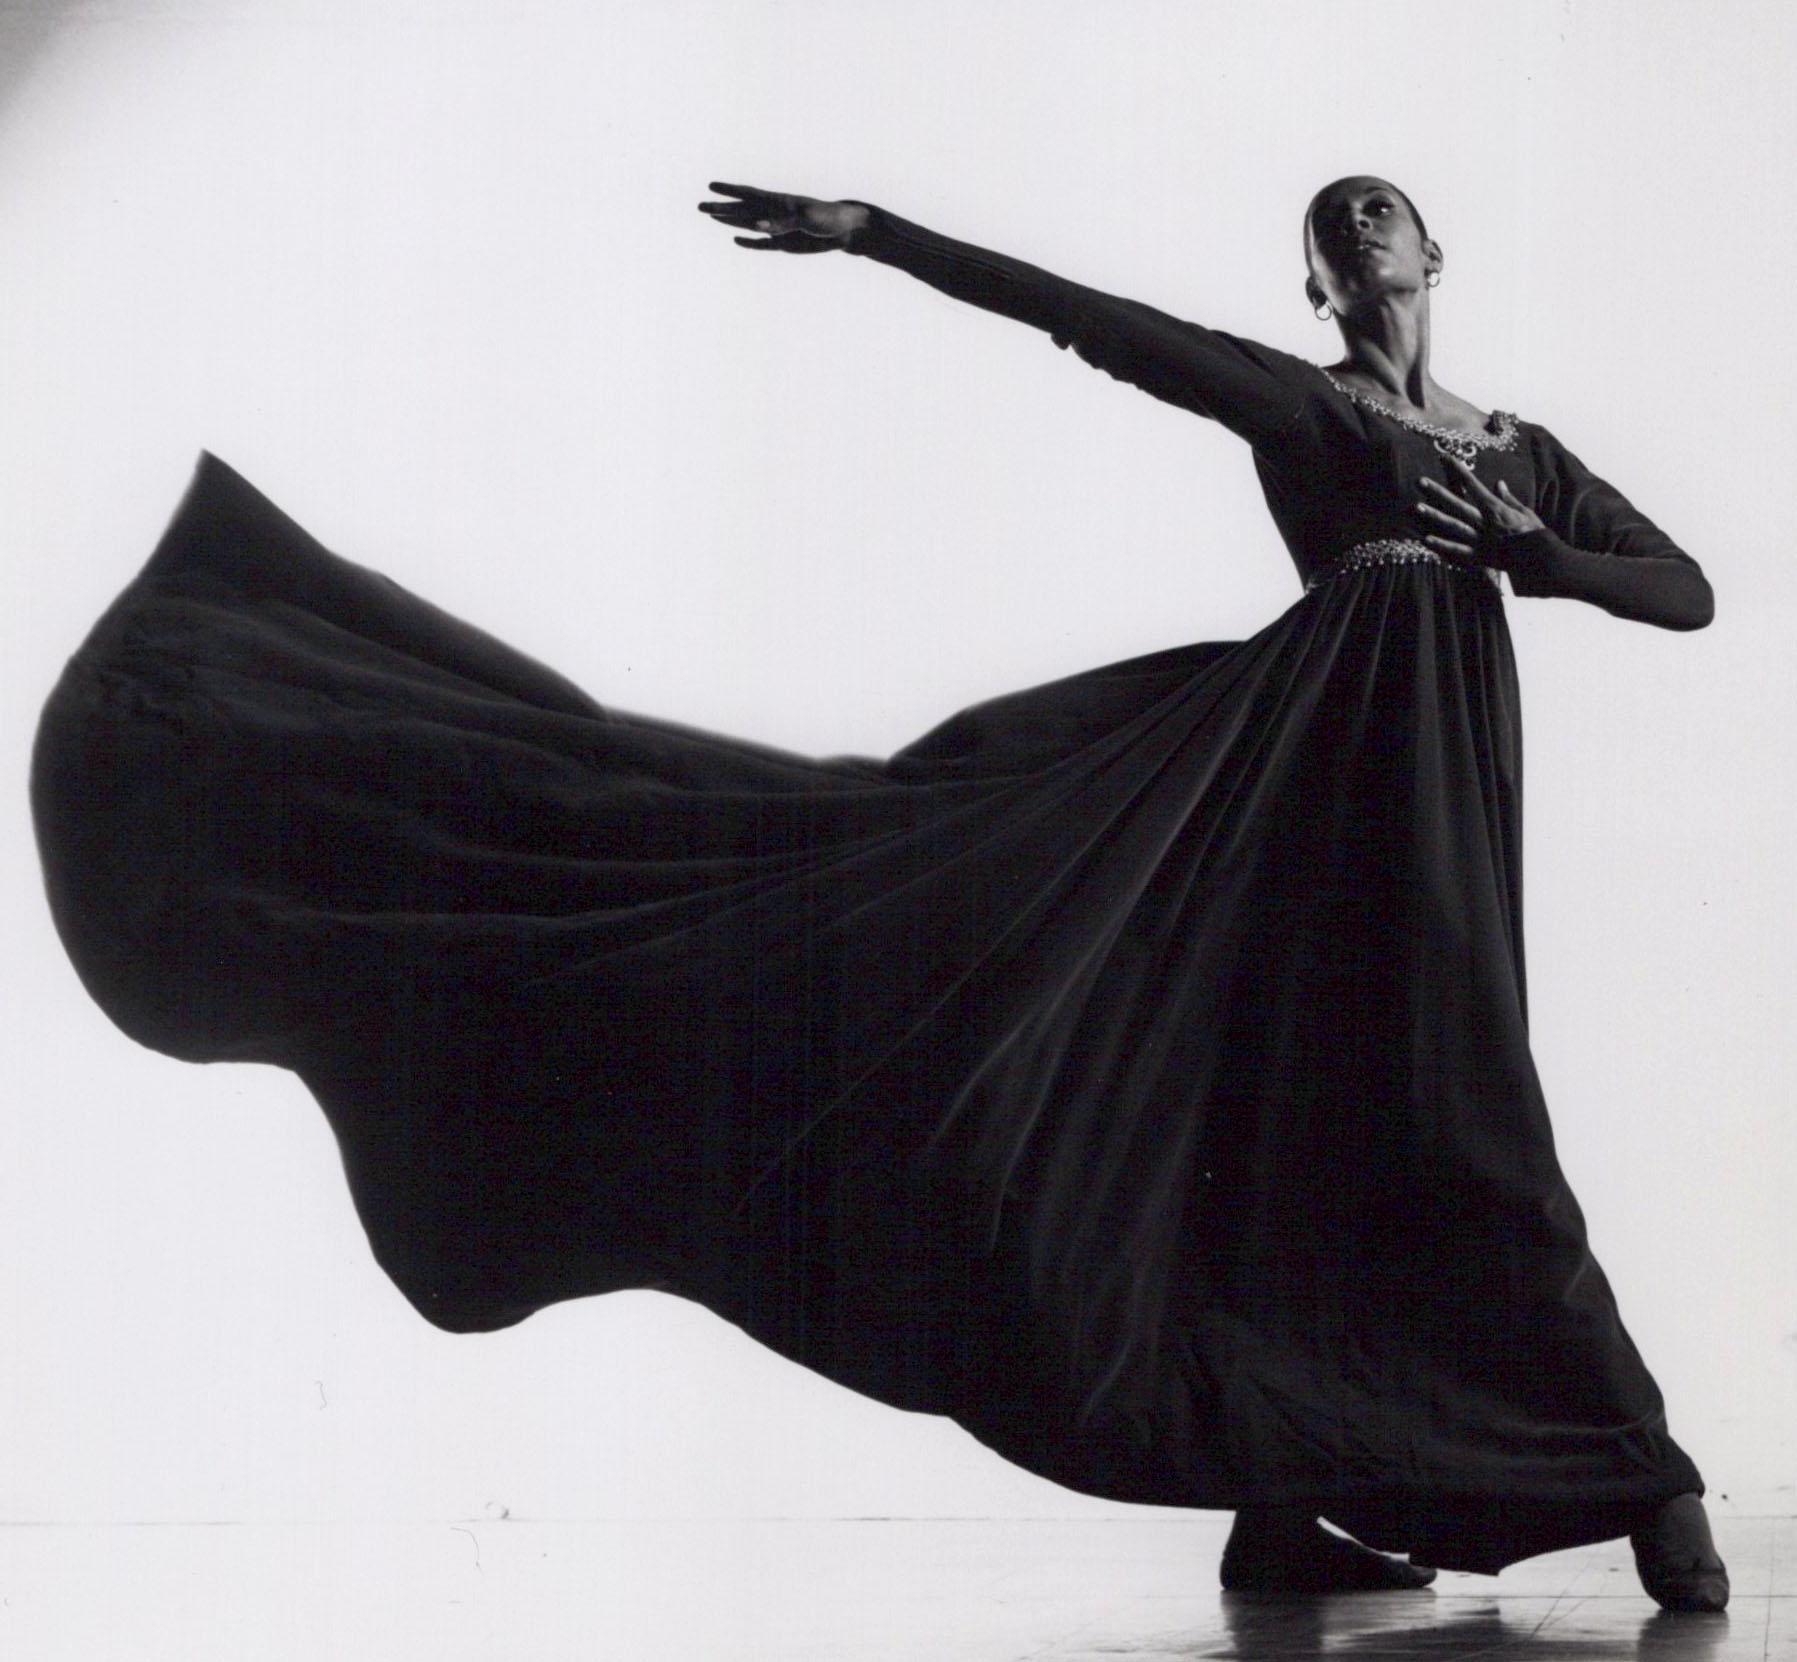 Dancer Carmen de Lavallade in Alvin Ailey's 'The Roots of the Blues' - Photograph by Jack Mitchell